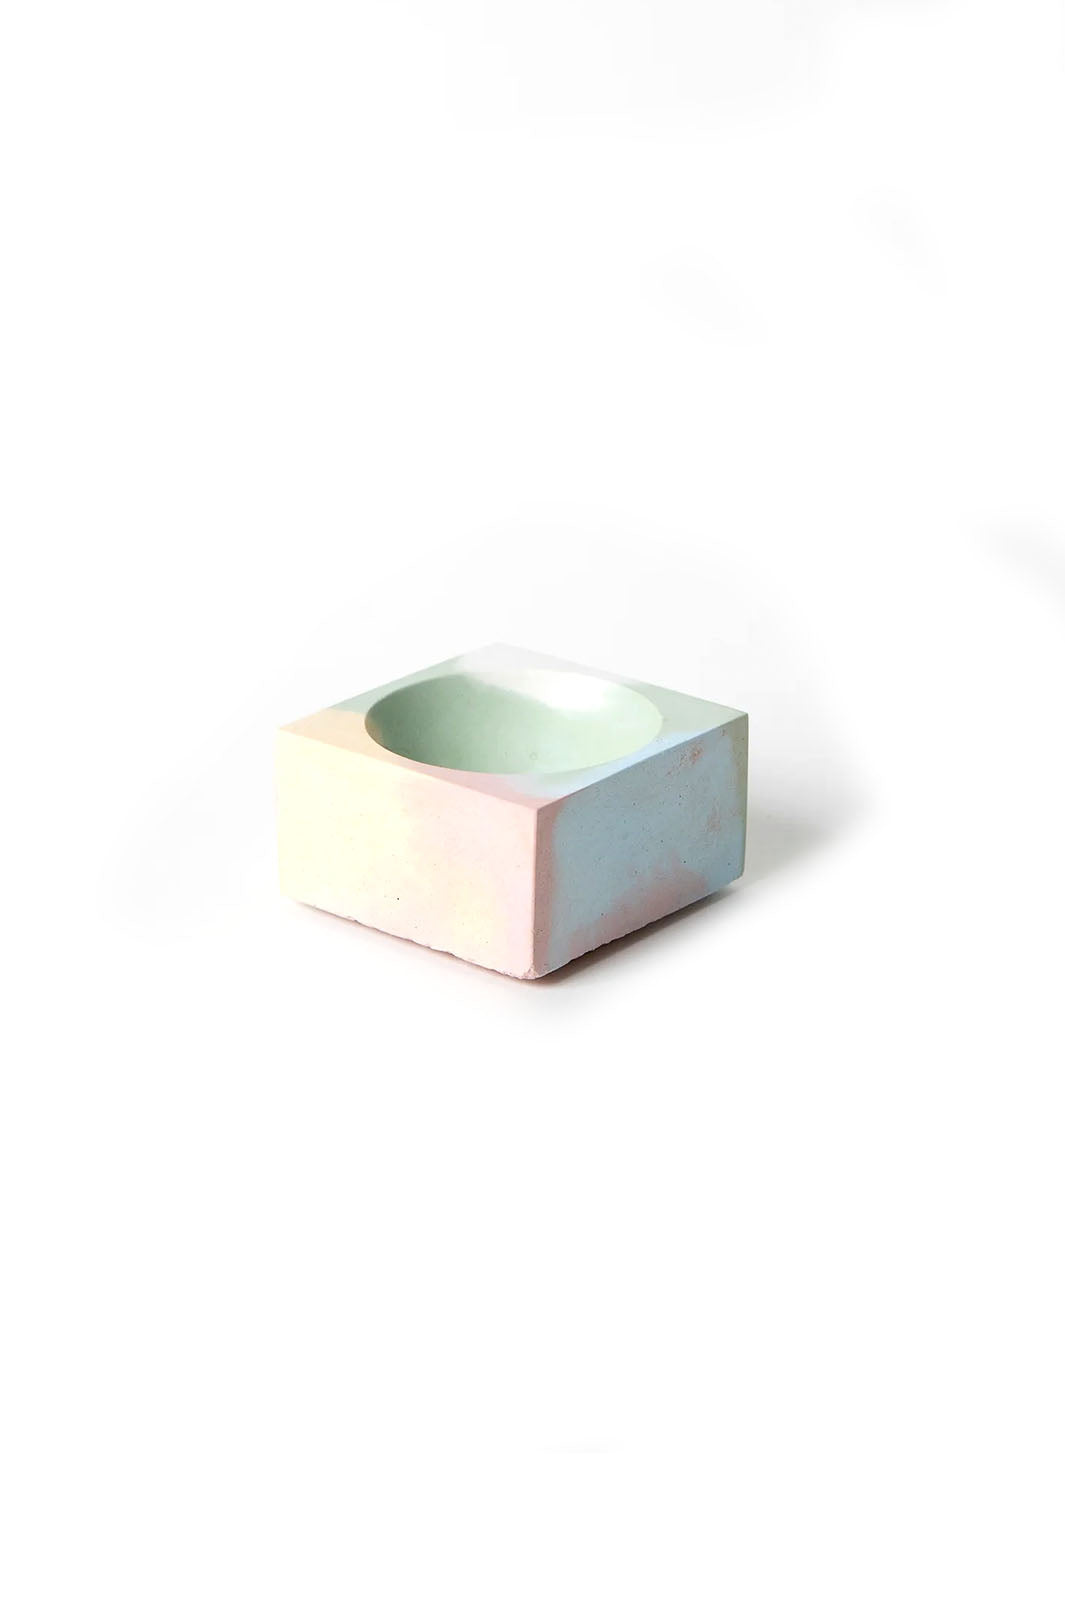 Marbled concrete jawbreaker square incense holder with a rounded inset center for the incense stick or cone